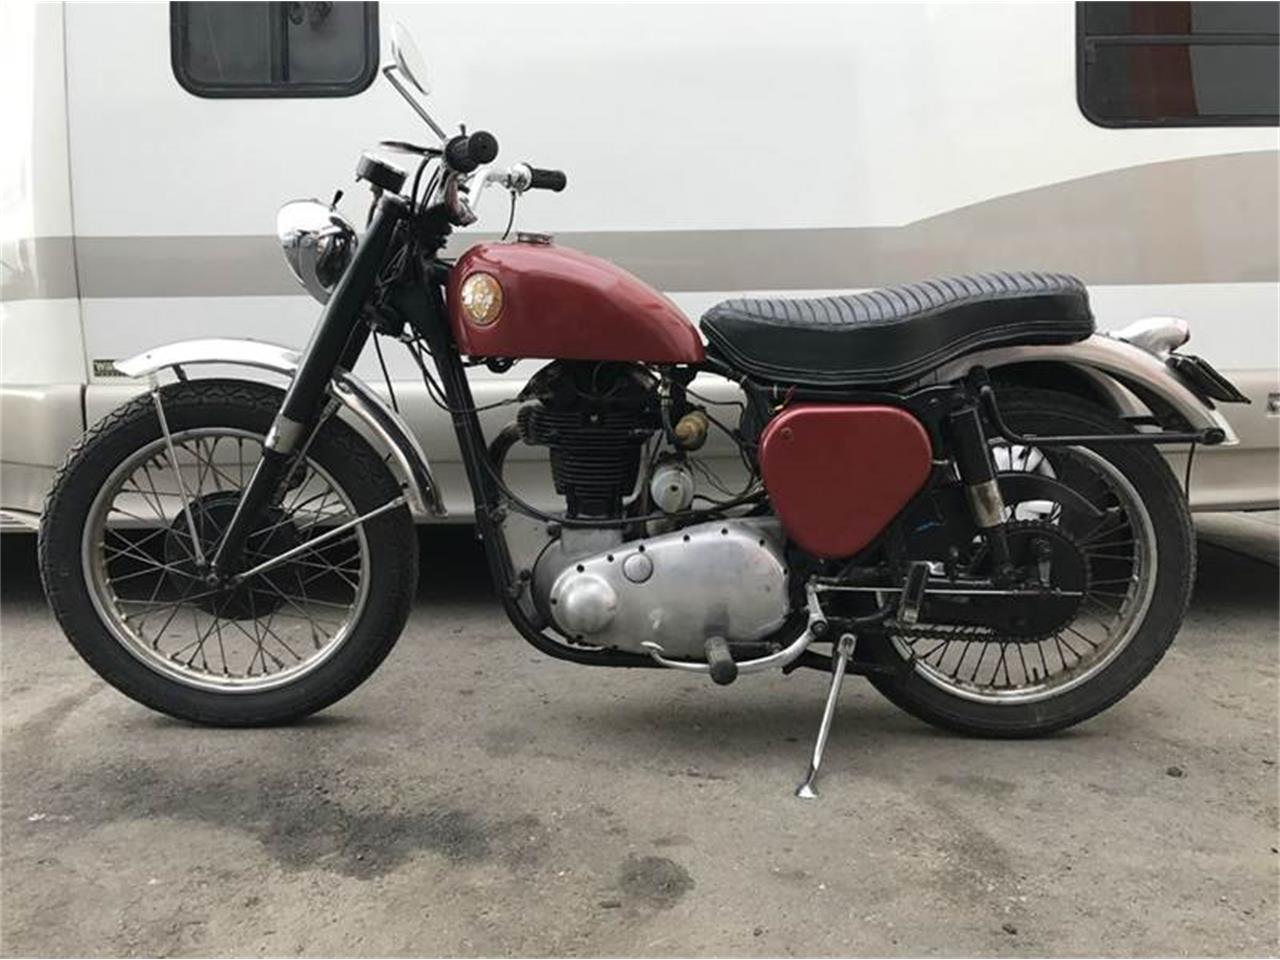 1955 BSA Motorcycle for Sale | ClassicCars.com | CC-972812